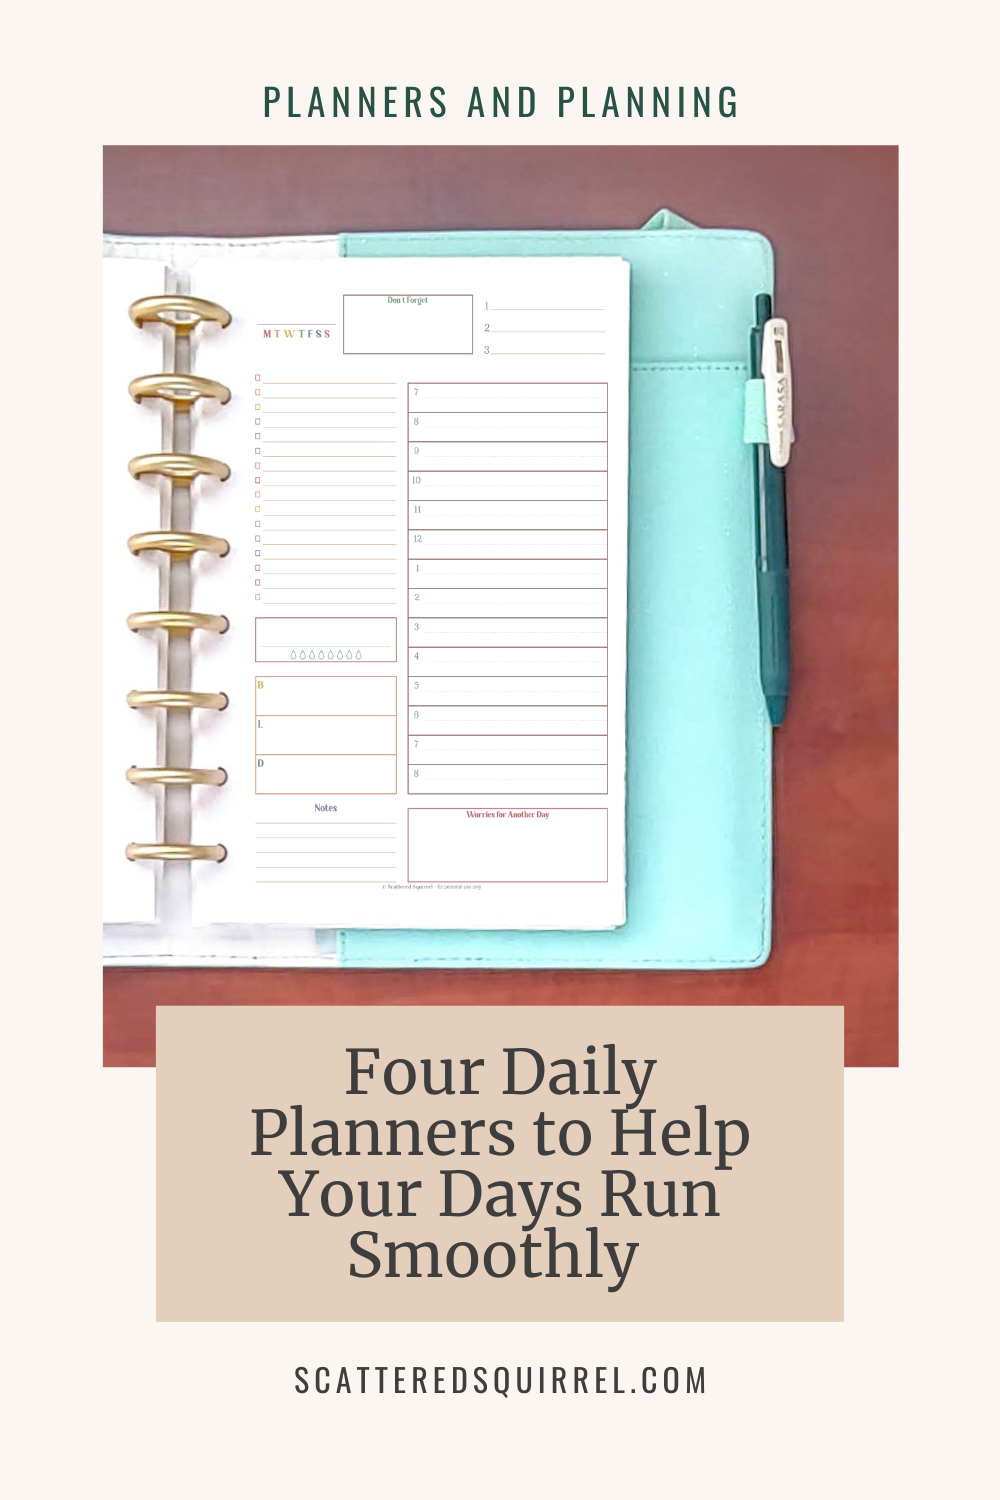 Four Daily Planners to Help Your Days Run Smoothly - Scattered